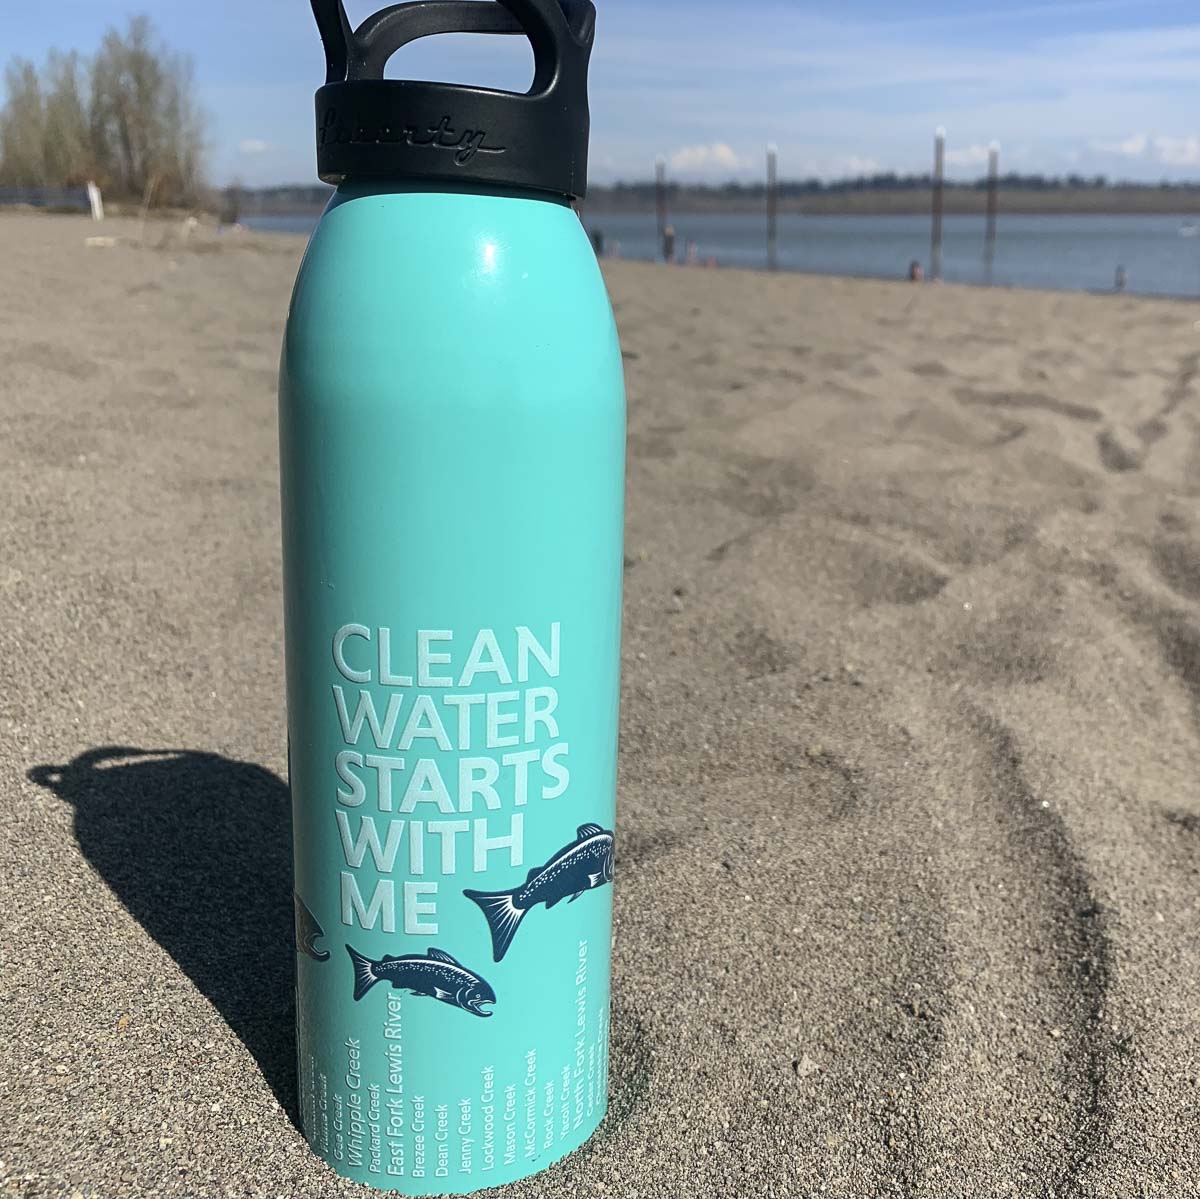 Participants completing each challenge will be entered to win a custom water bottle that highlights county streams and other prizes. Photo courtesy of Clark Co. WA Communications